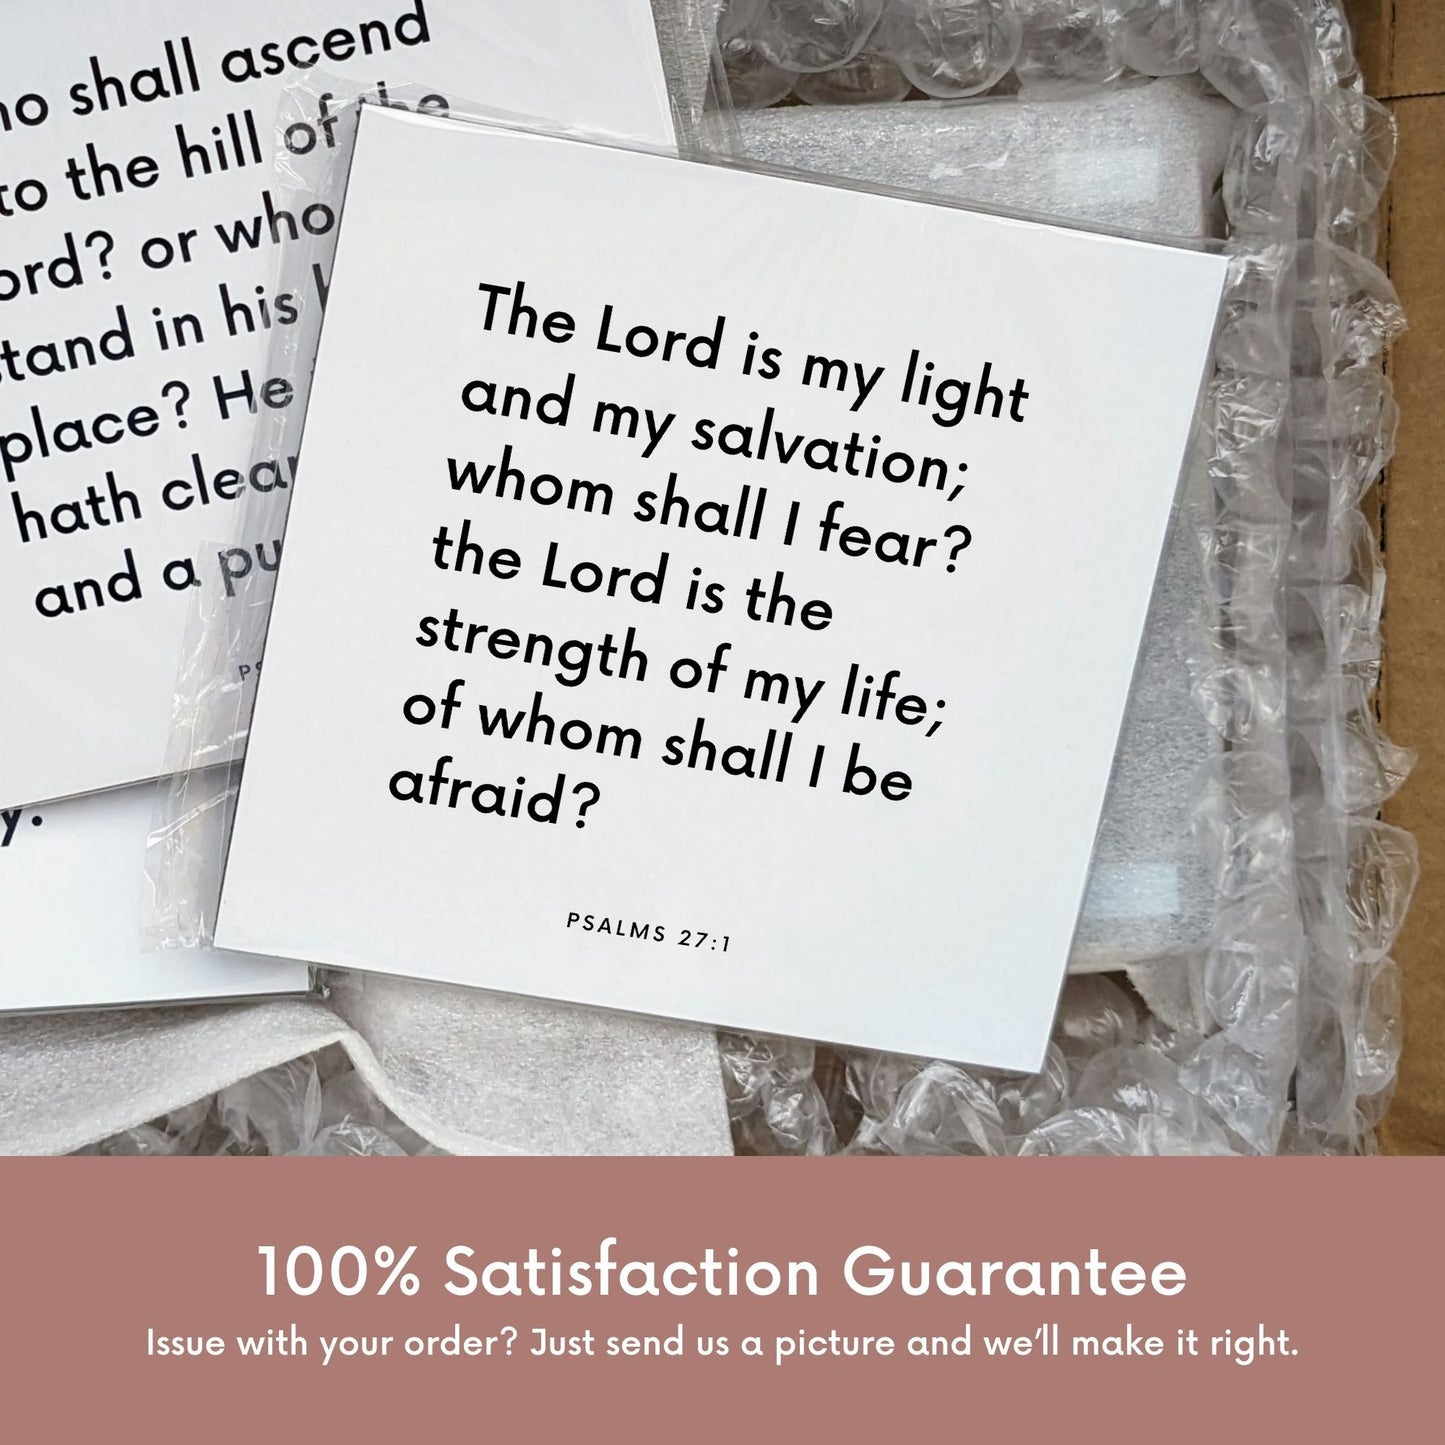 Shipping materials for scripture tile of Psalms 27:1 - "The Lord is my light and my salvation; whom shall I fear?"